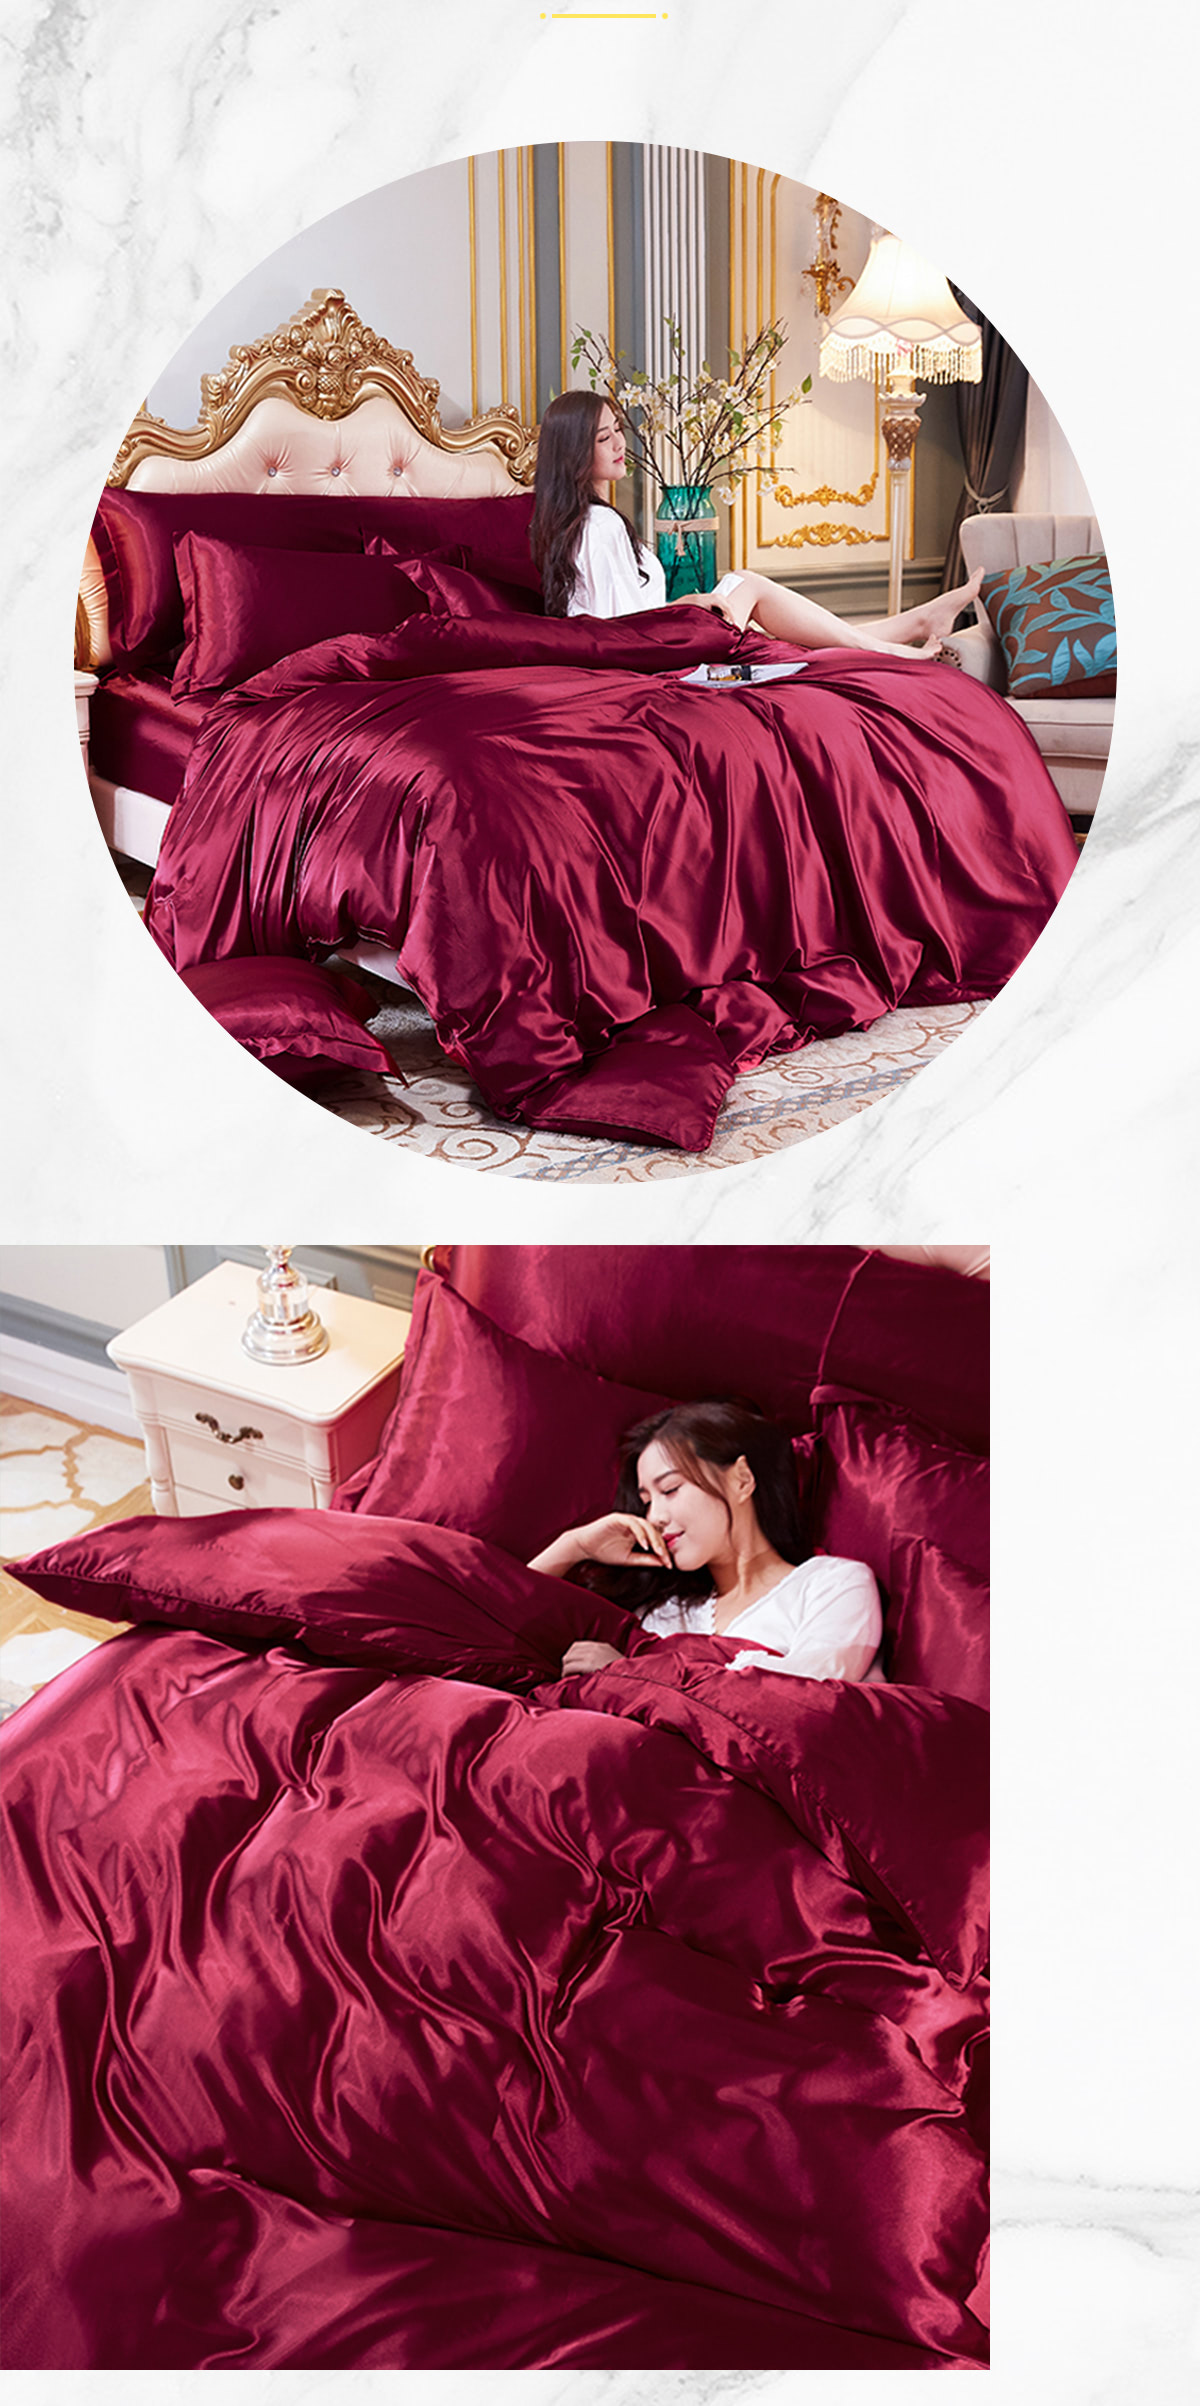 4-Piece-Soft-Silky-Satin-Solid-Color-Bed-Sheet-Pillowcases-Set28.jpg